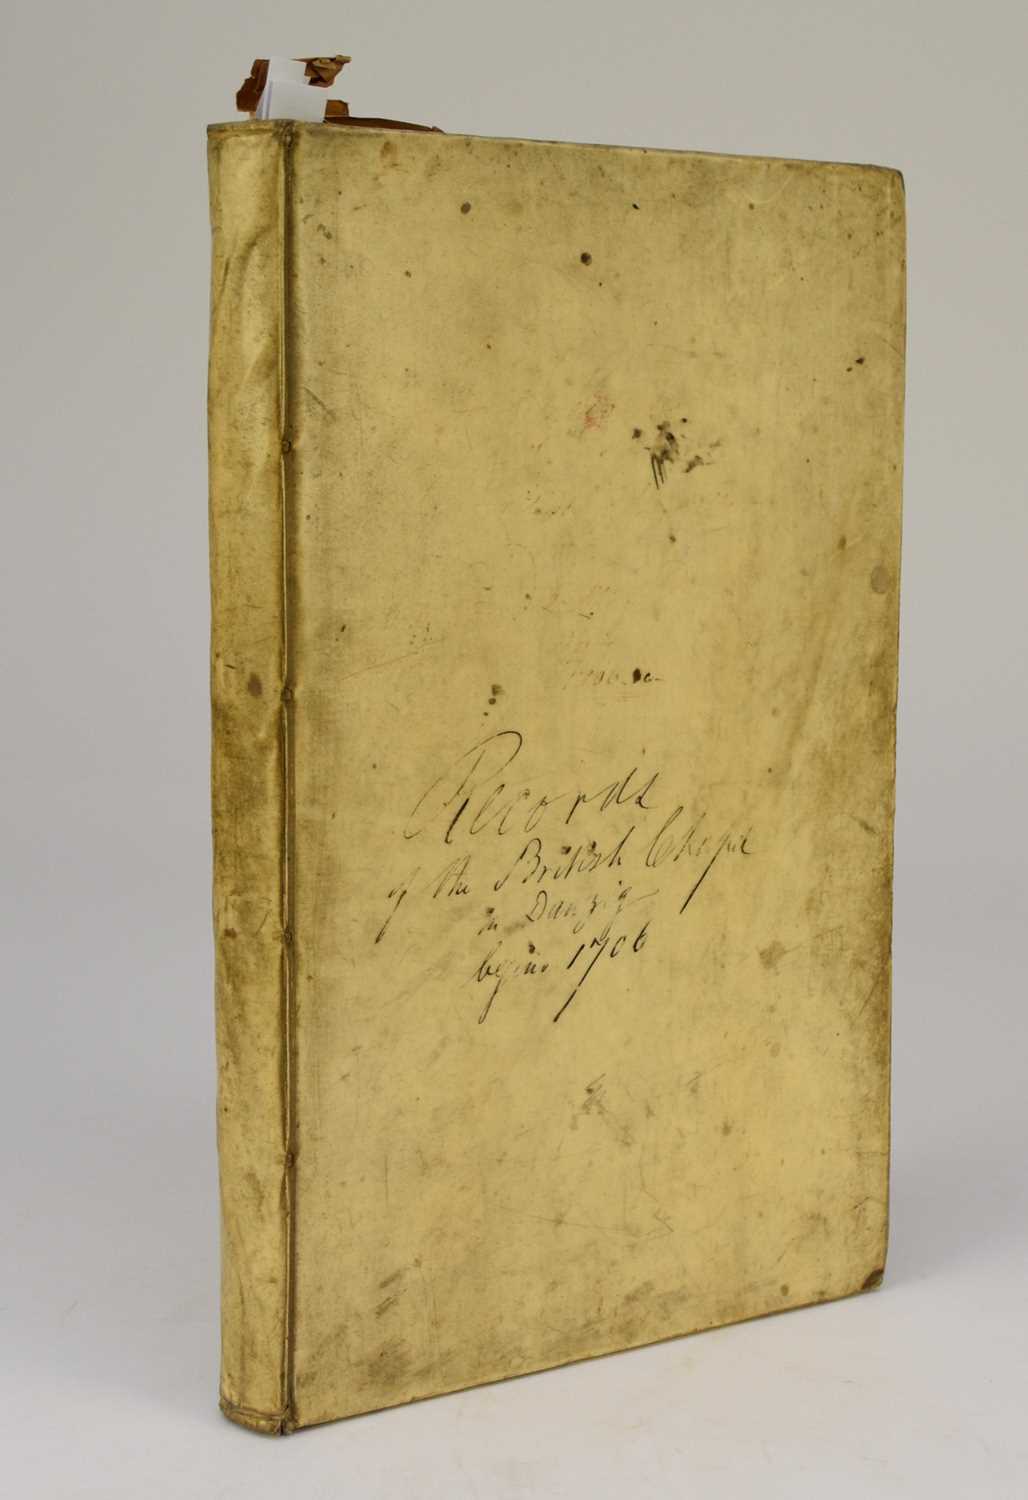 Lot 47 - MANUSCRIPT, EARLY 18TH CENTURY. MS title on front cover: 'Record of the British Chapel in Danzig begins 1706'. Folio, circa 131 hand-written pages, almost all in English...